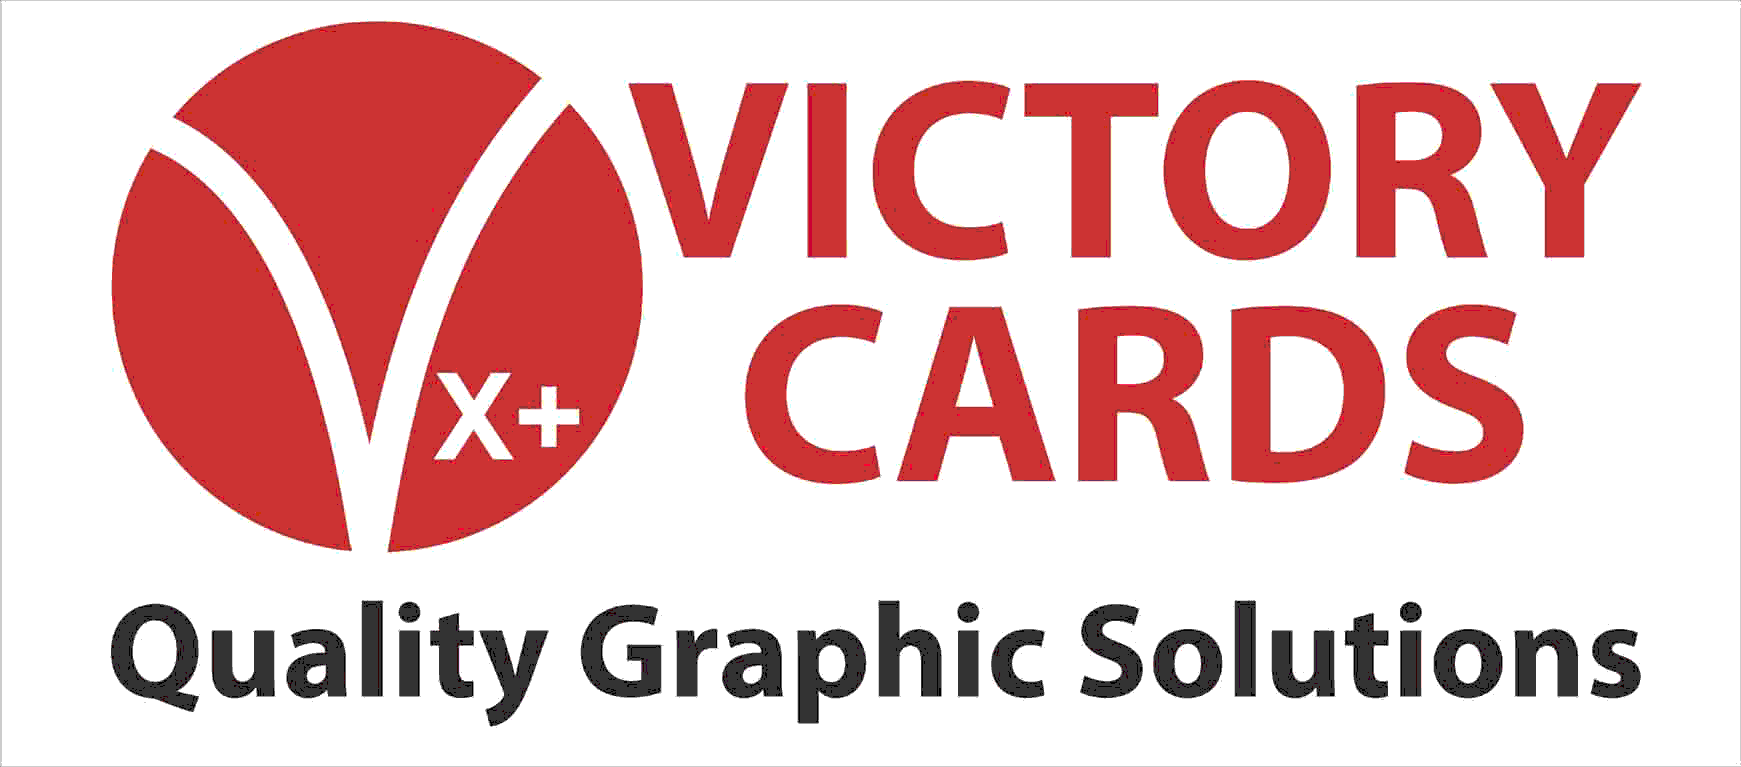 Victory Cards - Quality Graphic Solutions